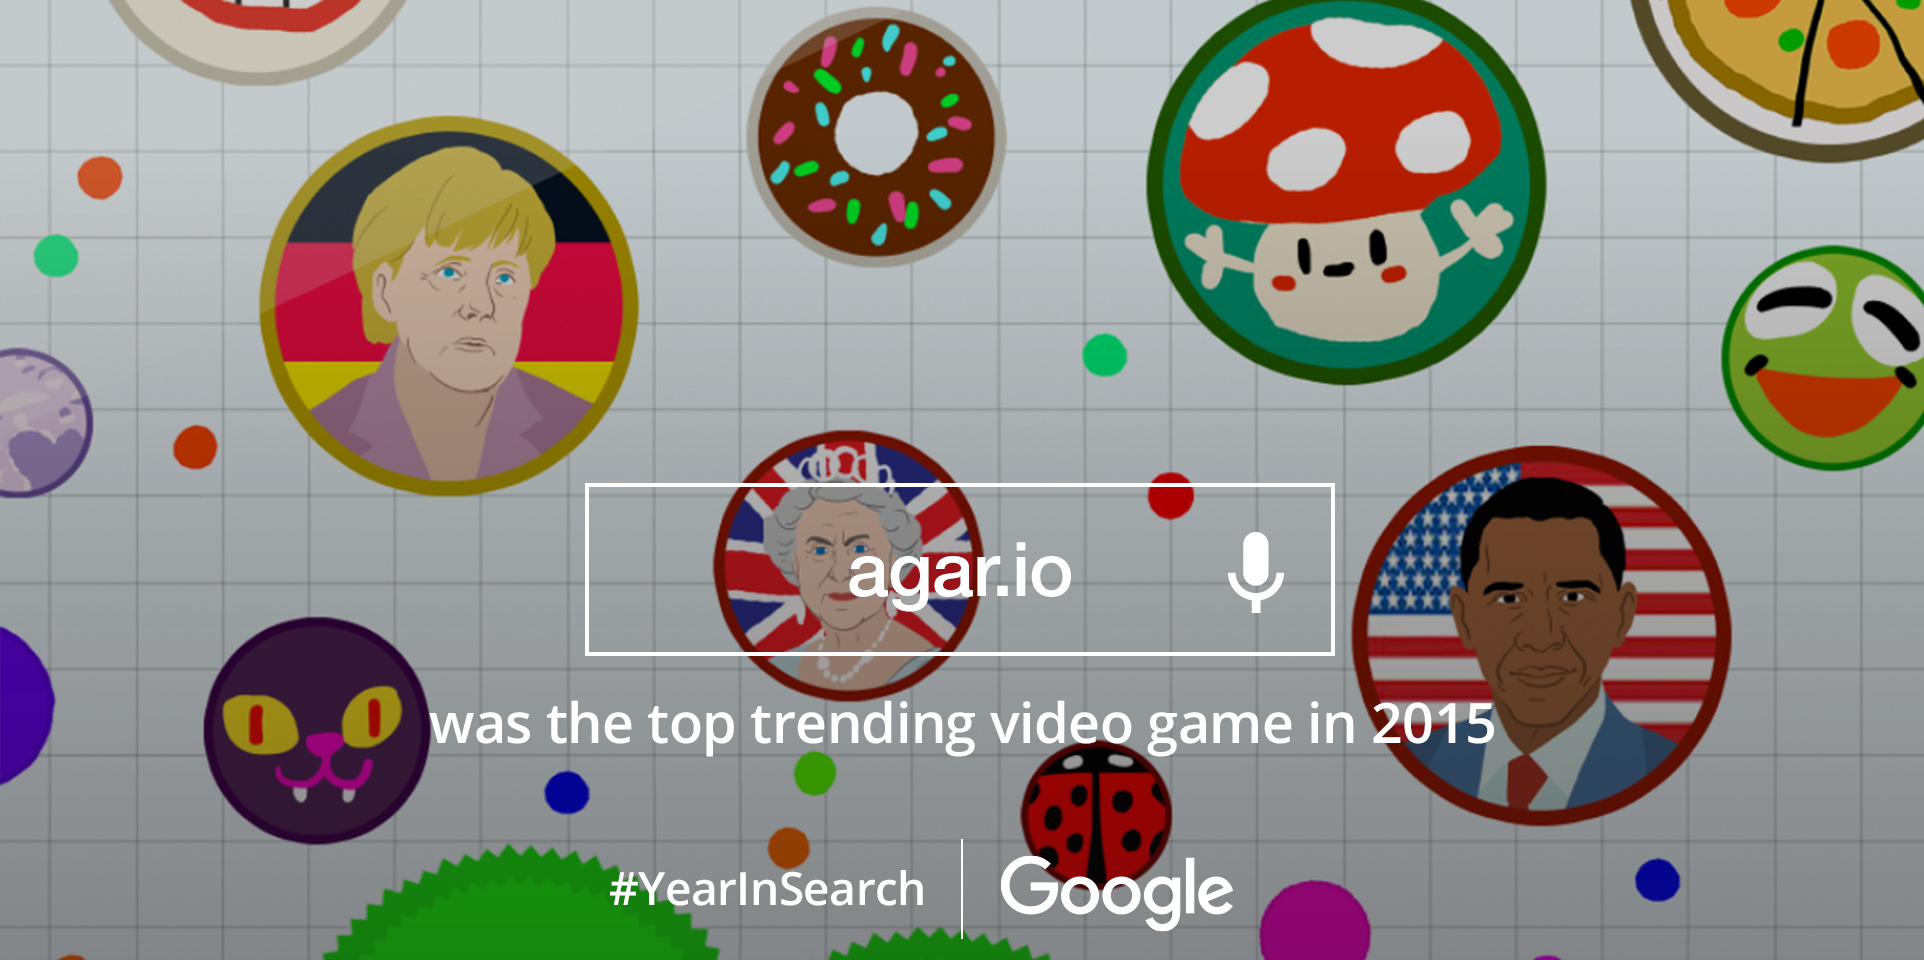 Agar.io was the top-trending game on Google Search in 2015.